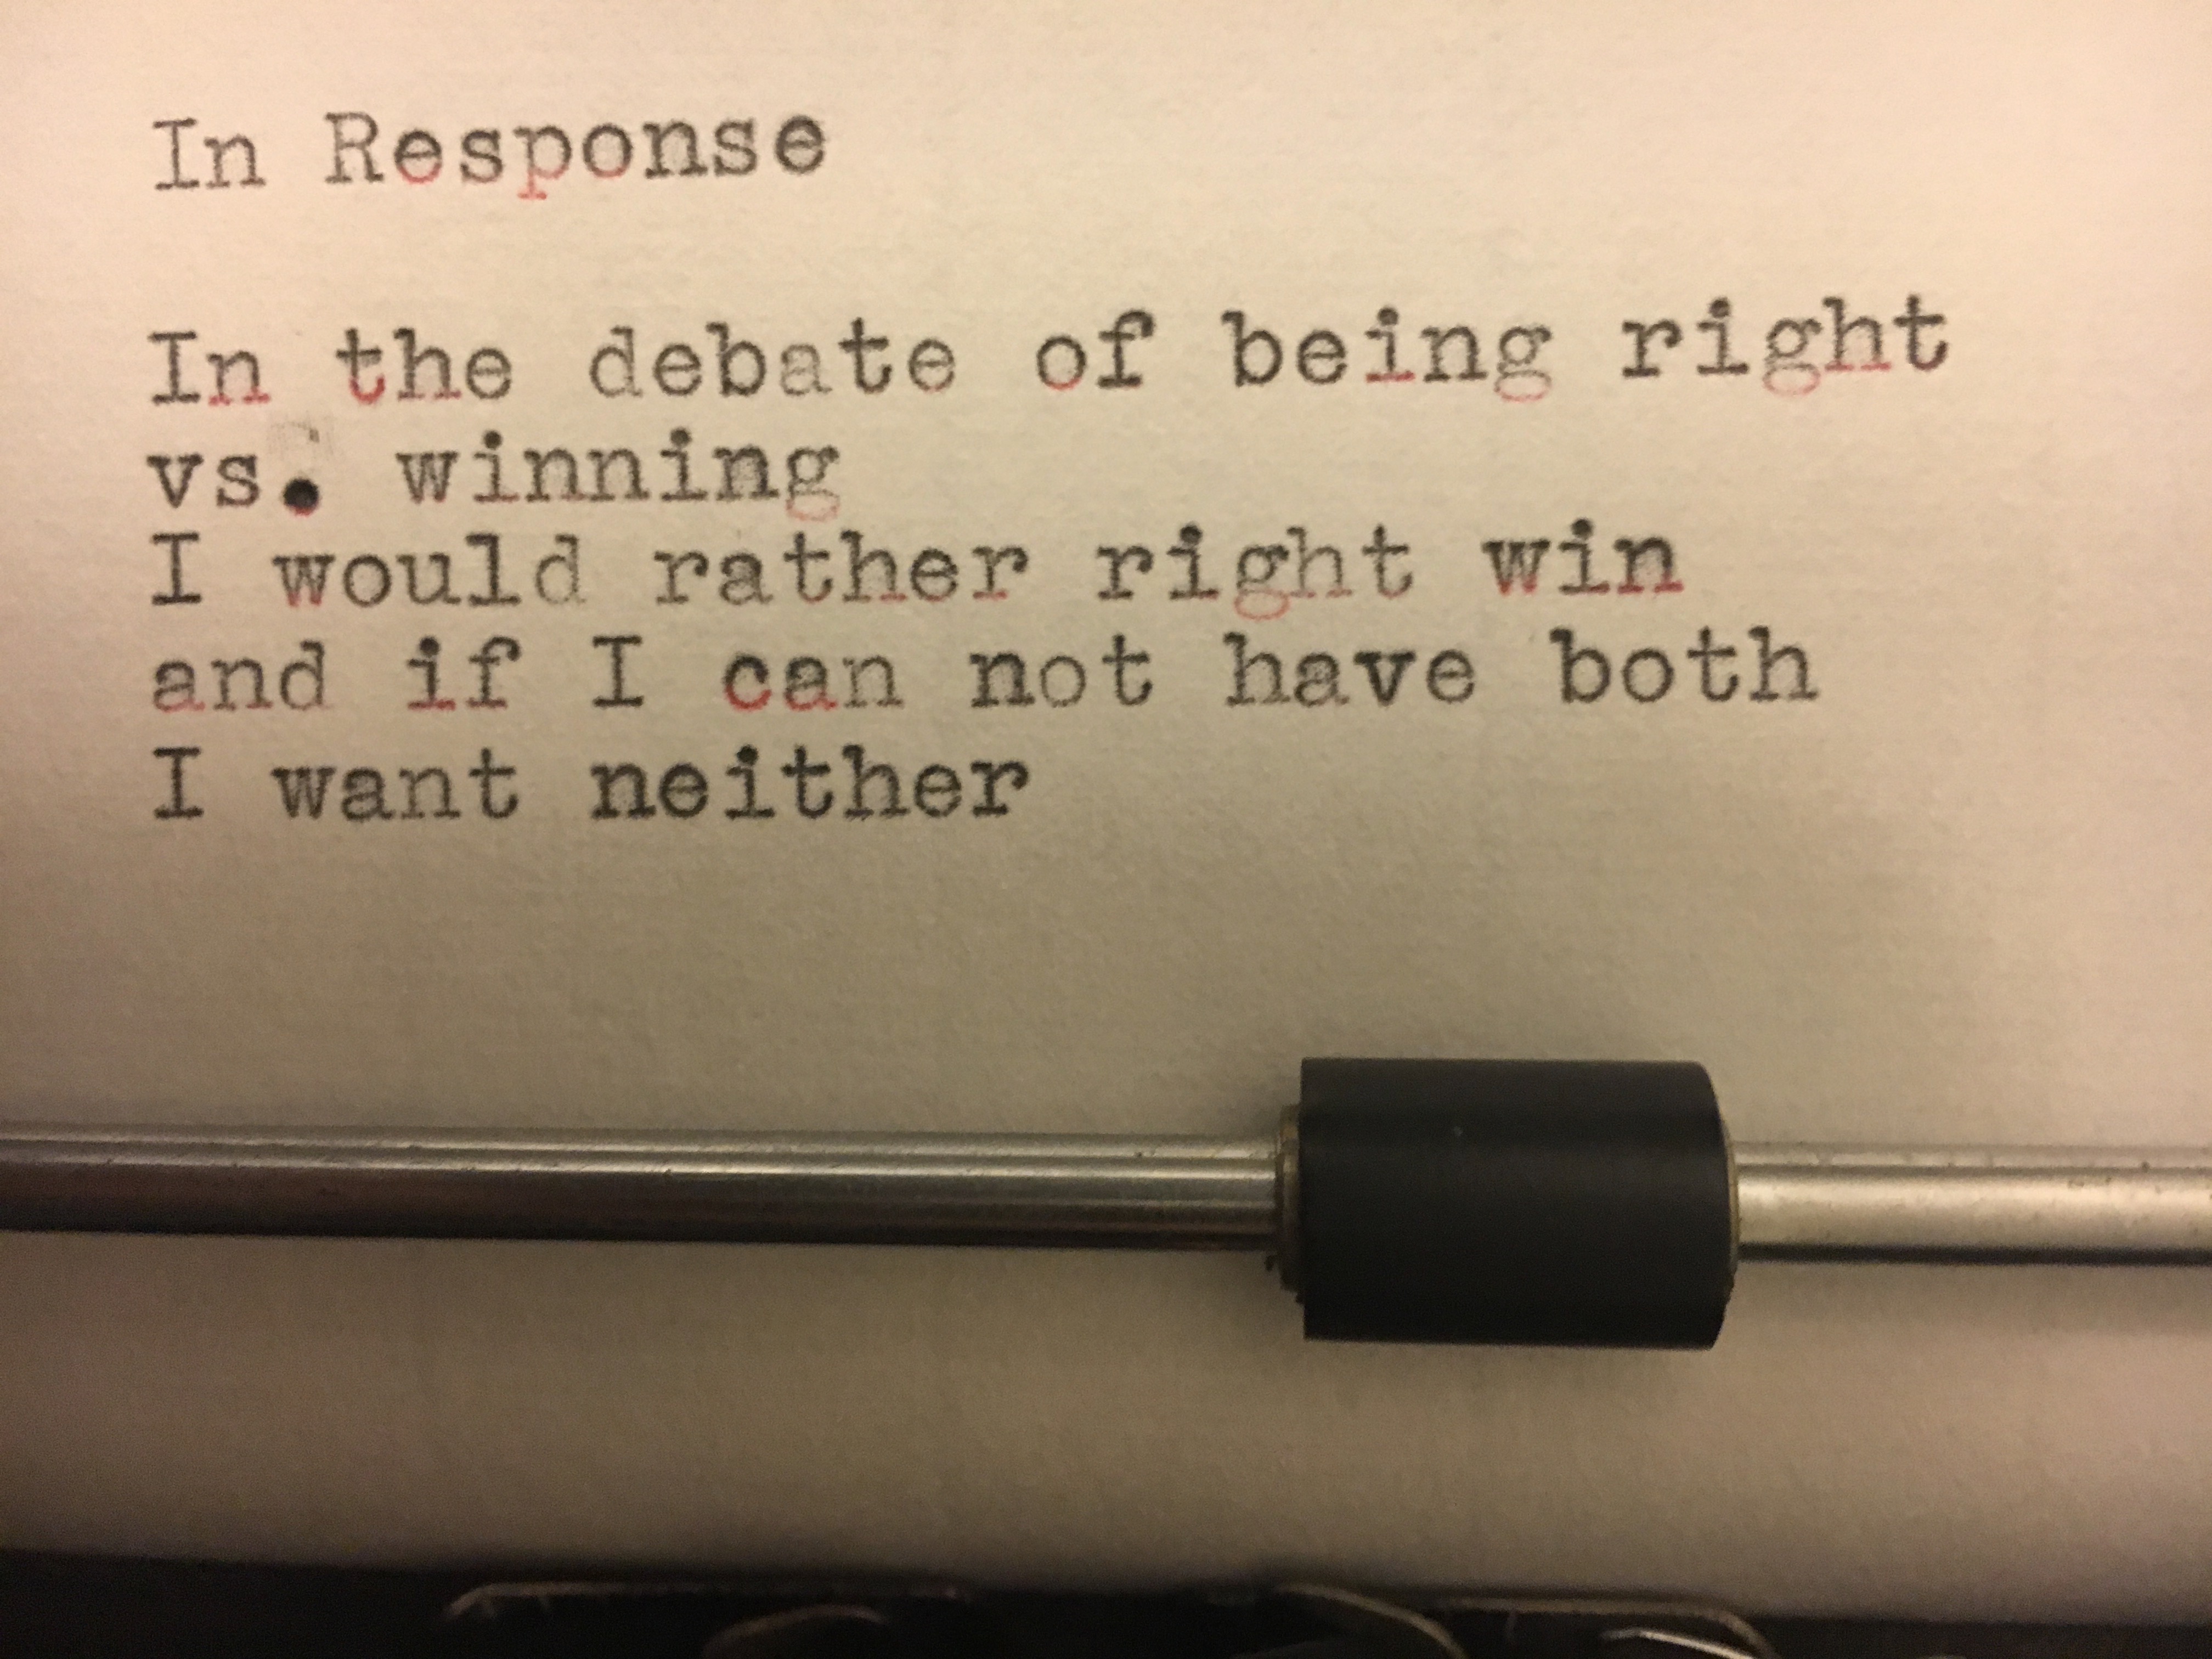 In the debate of being right or winning, I would rather right win and if I can not have both, I want neither.